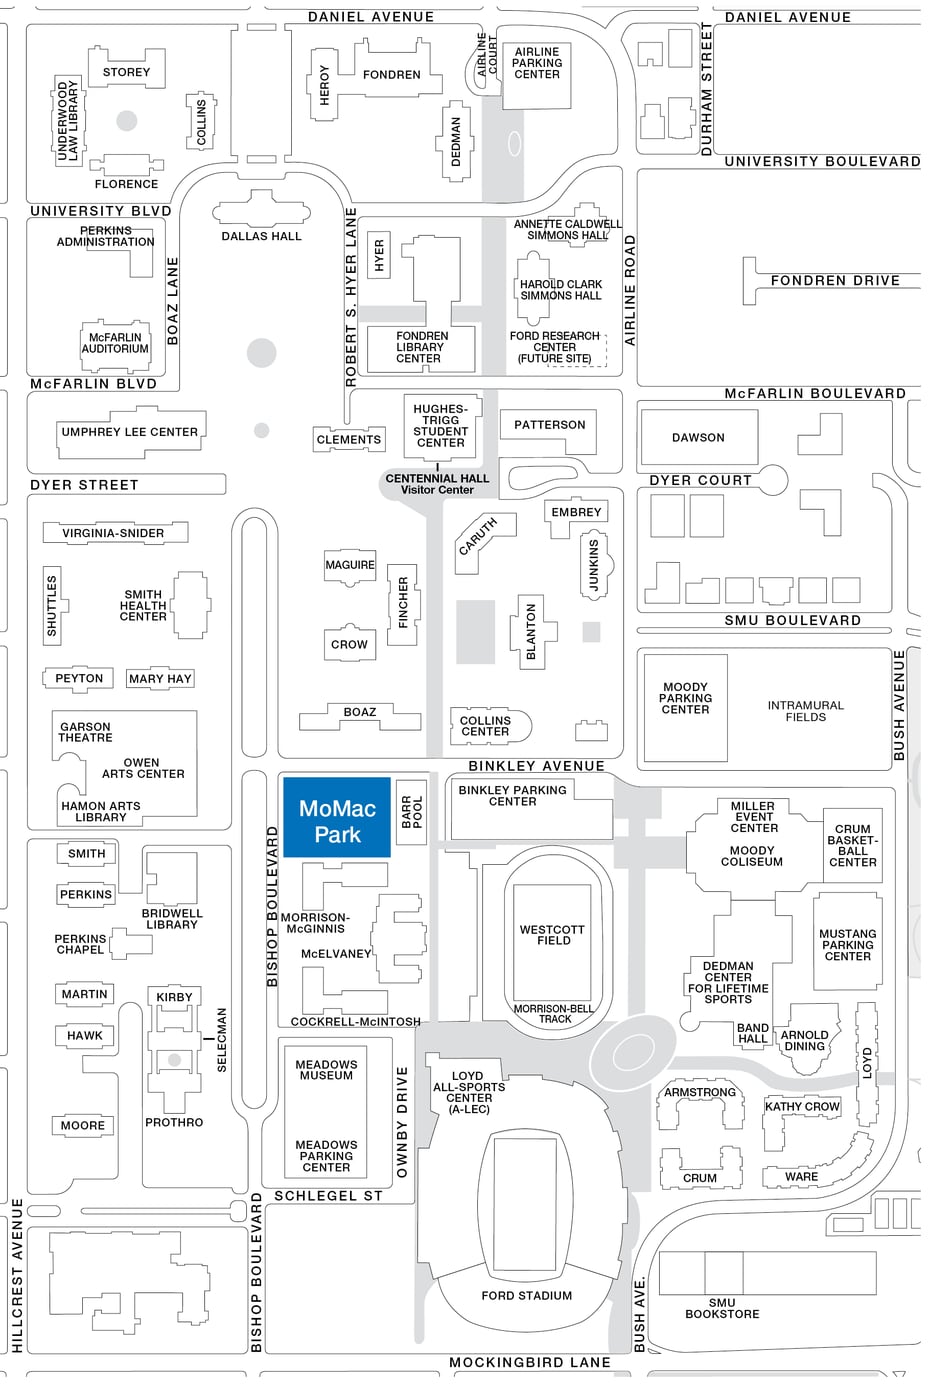 Morrison-McGinnis Park, colored blue in the above map, is the location SMU policy currently states all lawn displays will be held.